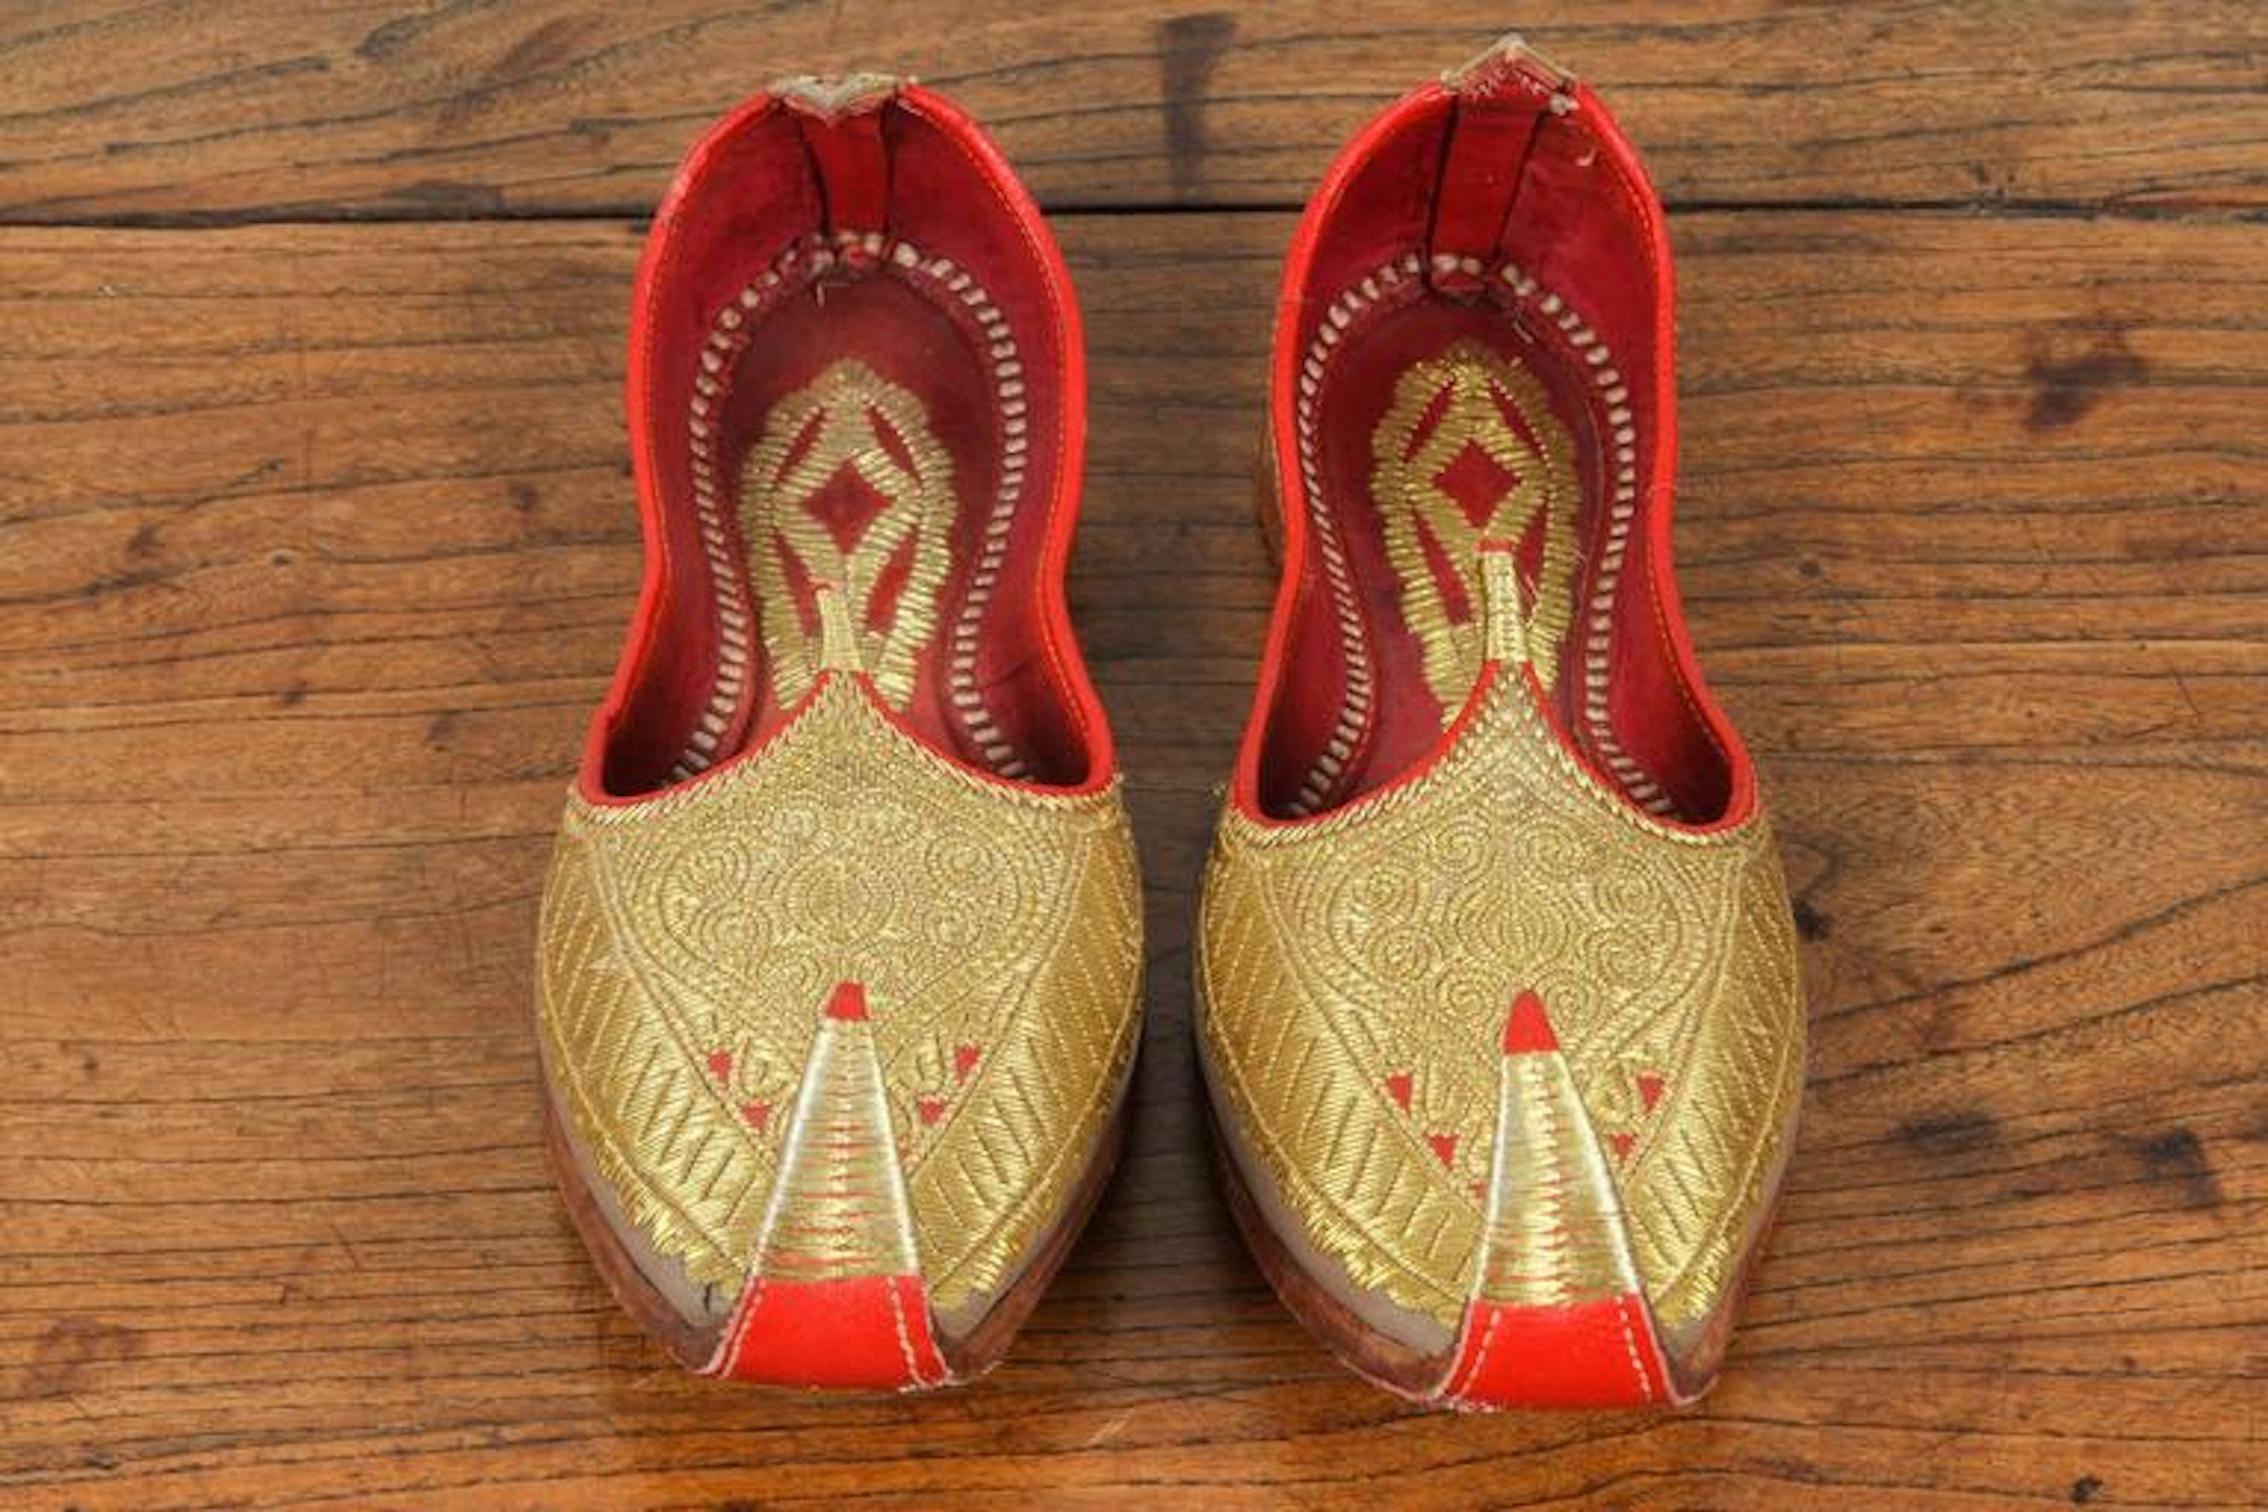 Amazing vintage Moorish Middle Eastern gold and red leather embroidered shoes. 
Ceremonial Royal leather wedding slippers, embroidered with gold thread.
Aladdin, Ali Baba Arabic genie Ottoman style Classic curled toe amazing to use as decorative